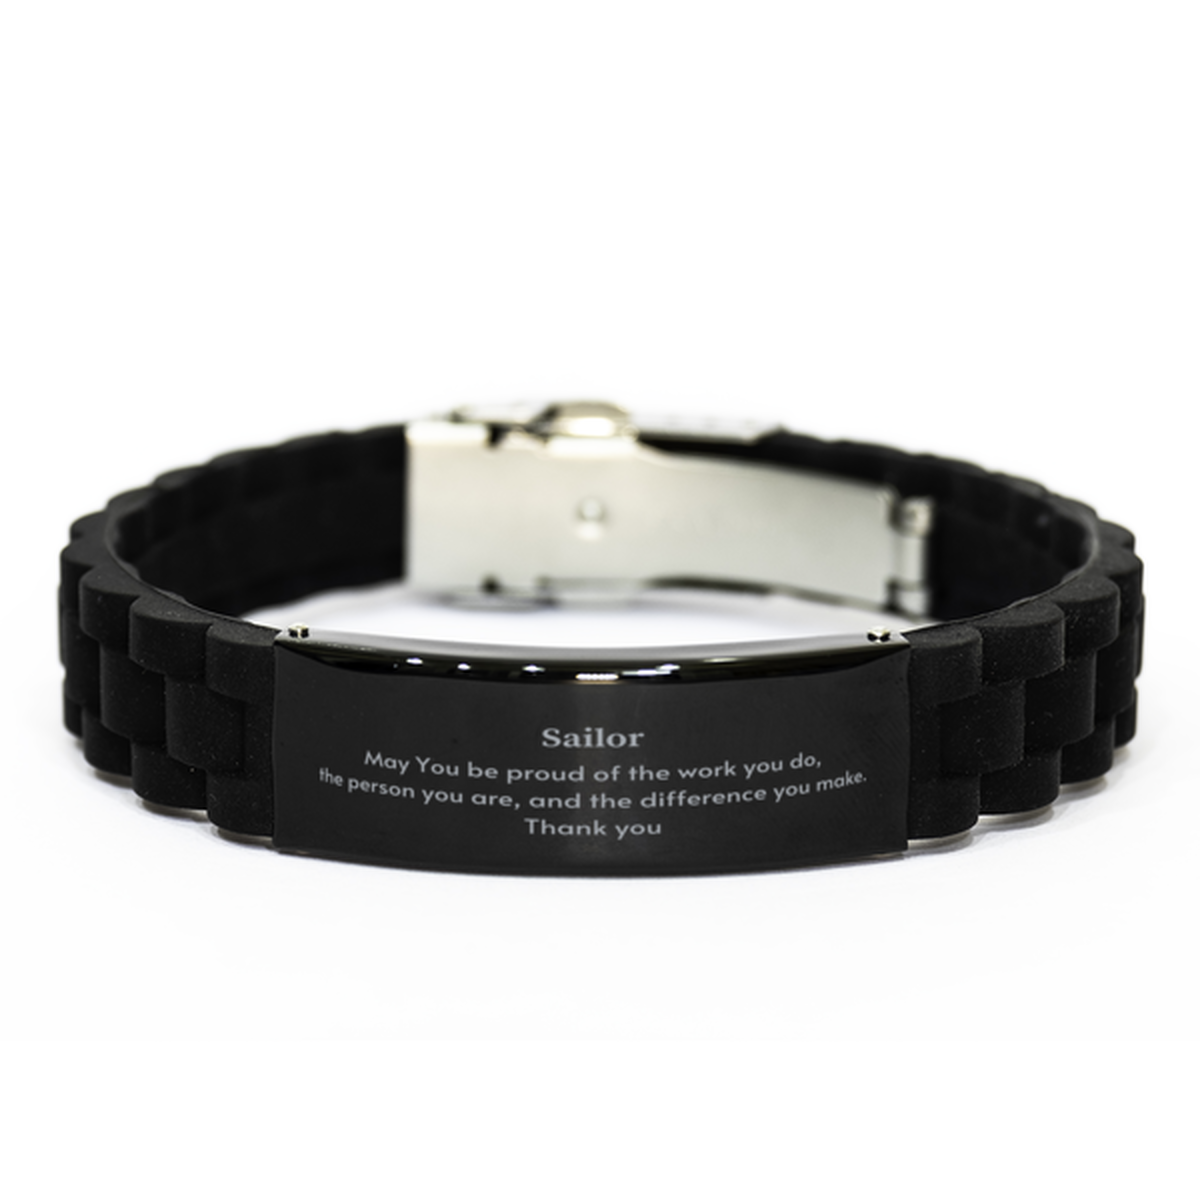 Heartwarming Black Glidelock Clasp Bracelet Retirement Coworkers Gifts for Sailor, Sailor May You be proud of the work you do, the person you are Gifts for Boss Men Women Friends